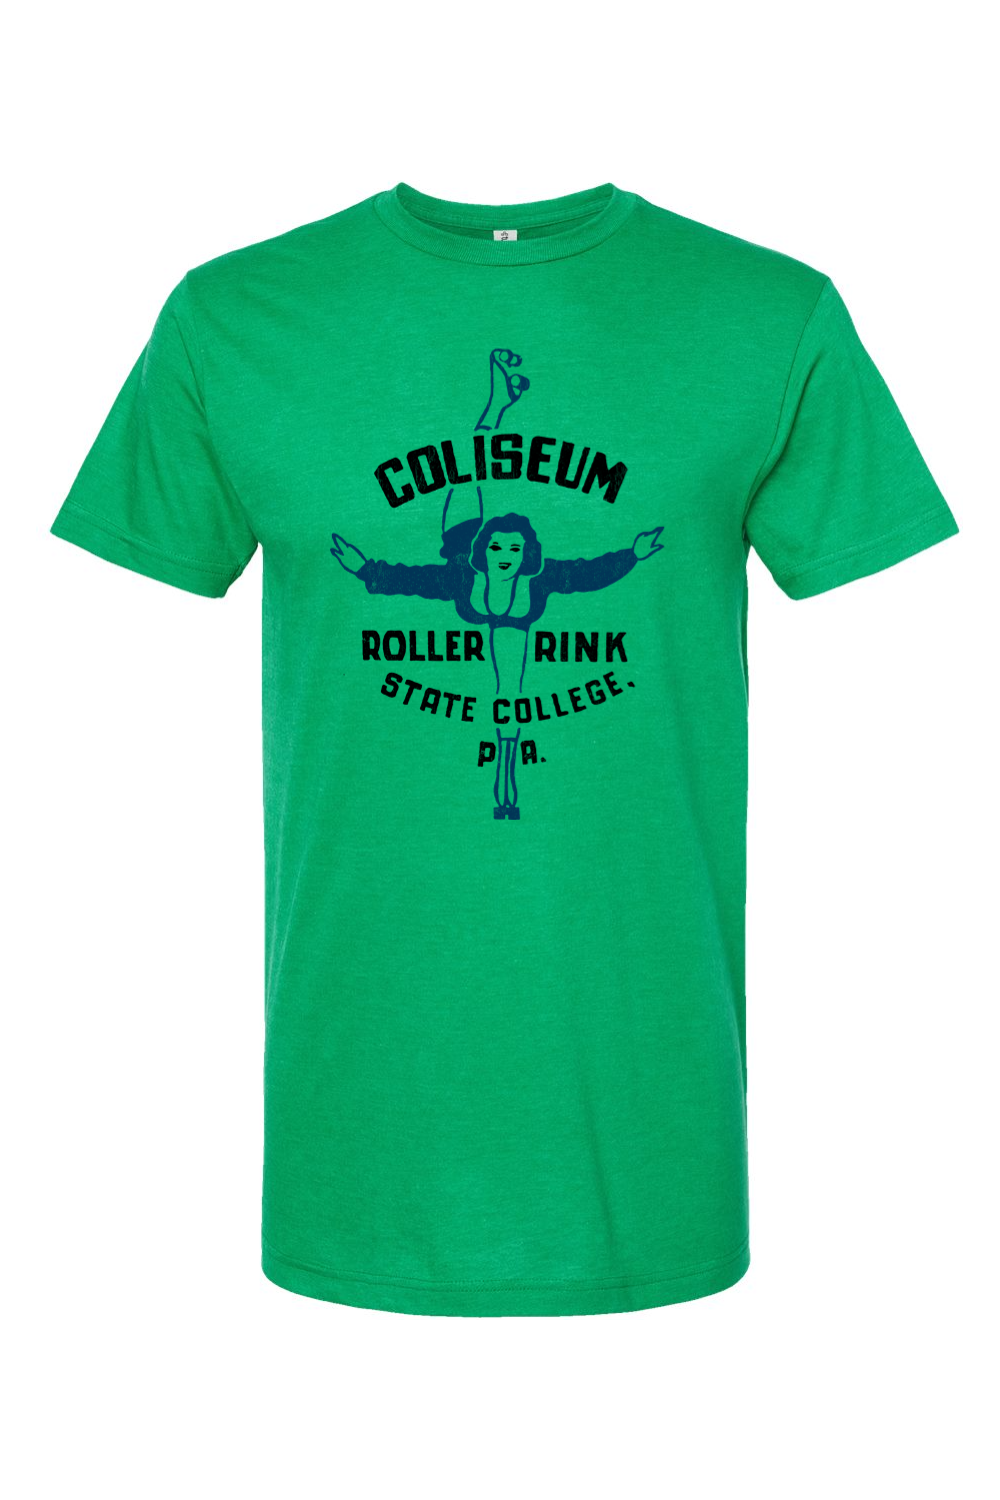 Coliseum Roller Rink - State College, PA - Yinzylvania